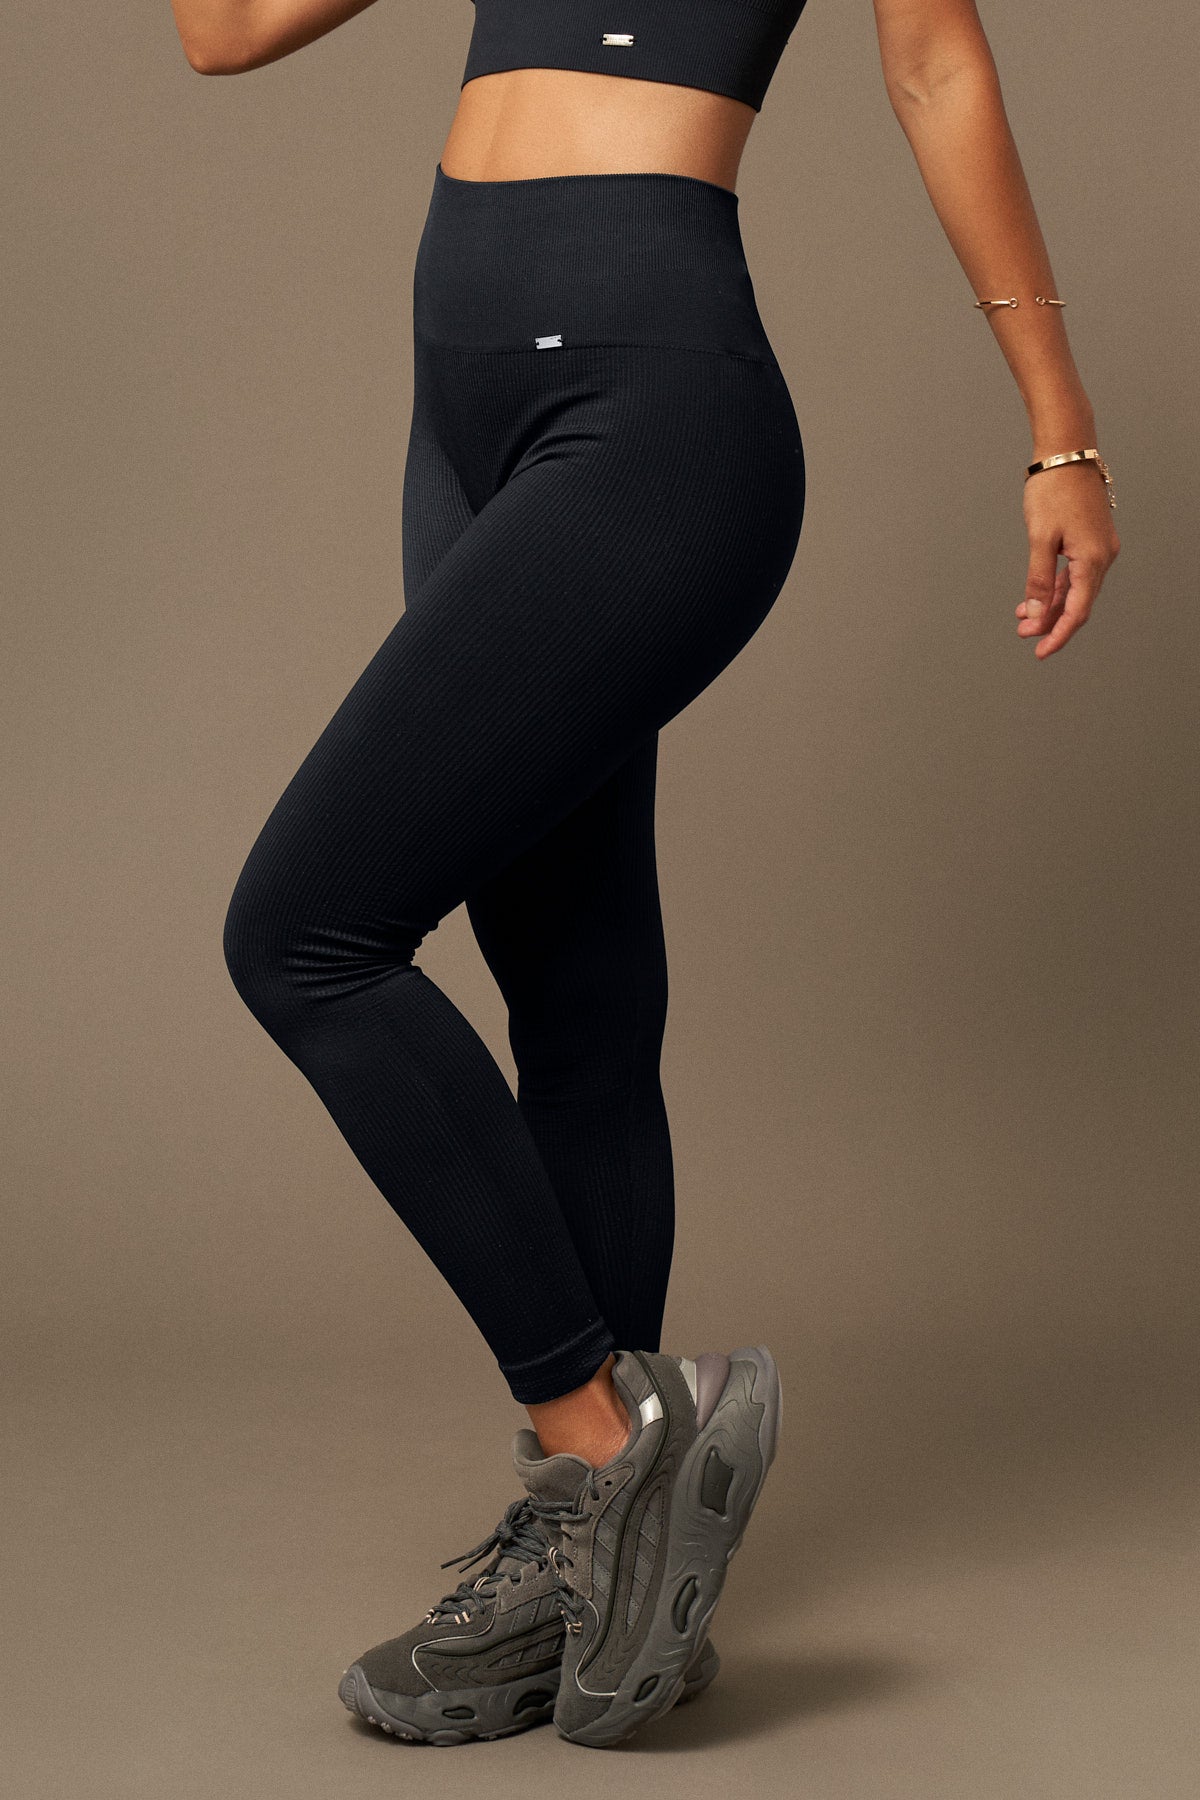 Beyond Leg in Navy-Long Leggings-Shop Sustainable Recycled Yoga Leggings Women's Clothing On-line Barcelona Believe Athletics Sustainable Recycled Yoga Clothes